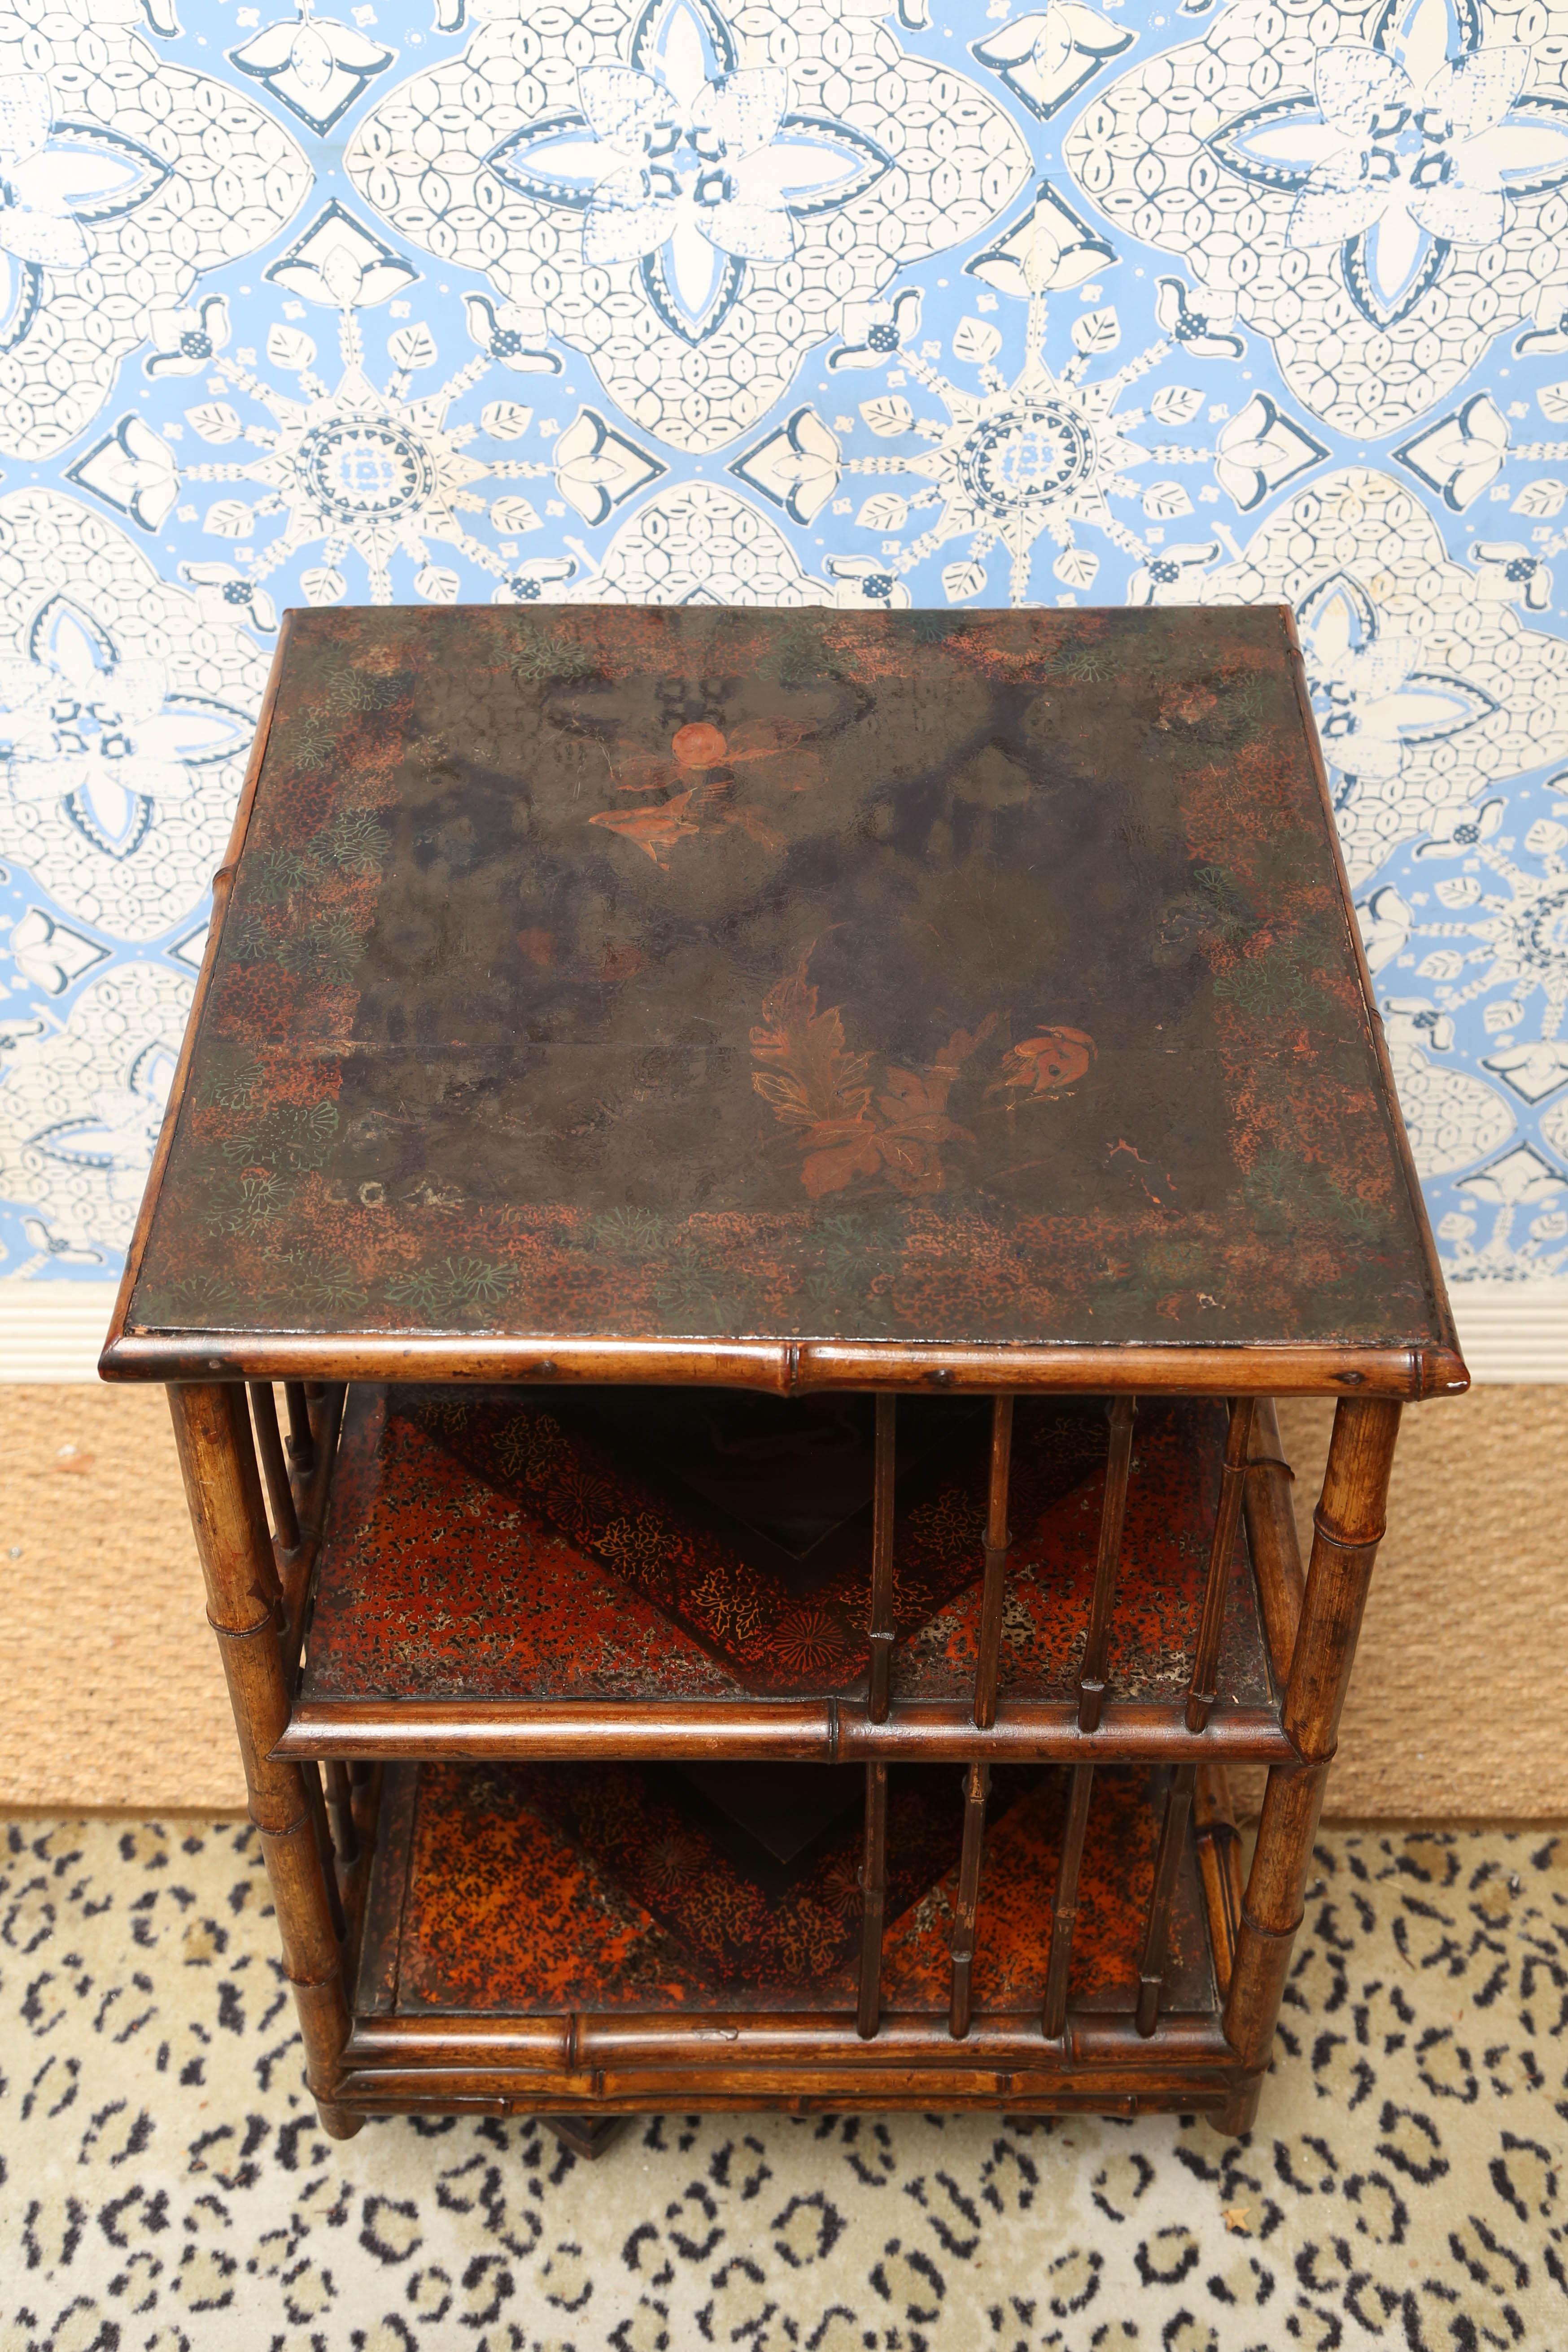 Superb 19th century English bamboo turning table on wheels for books or displays with Japanning.